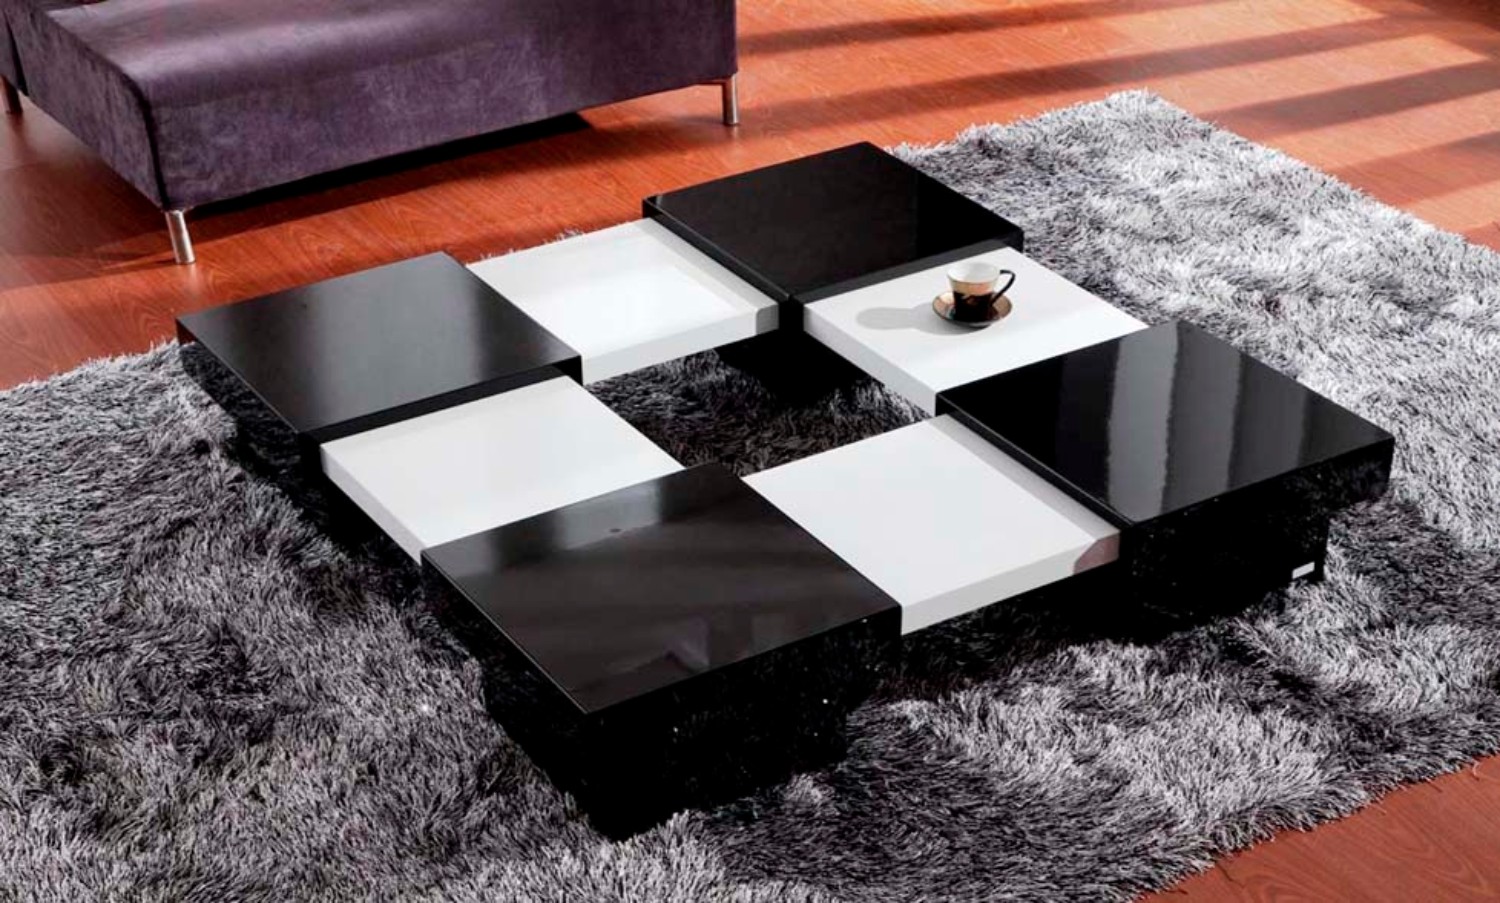 Get Ideas For a New Center Table For Your Living Room ...